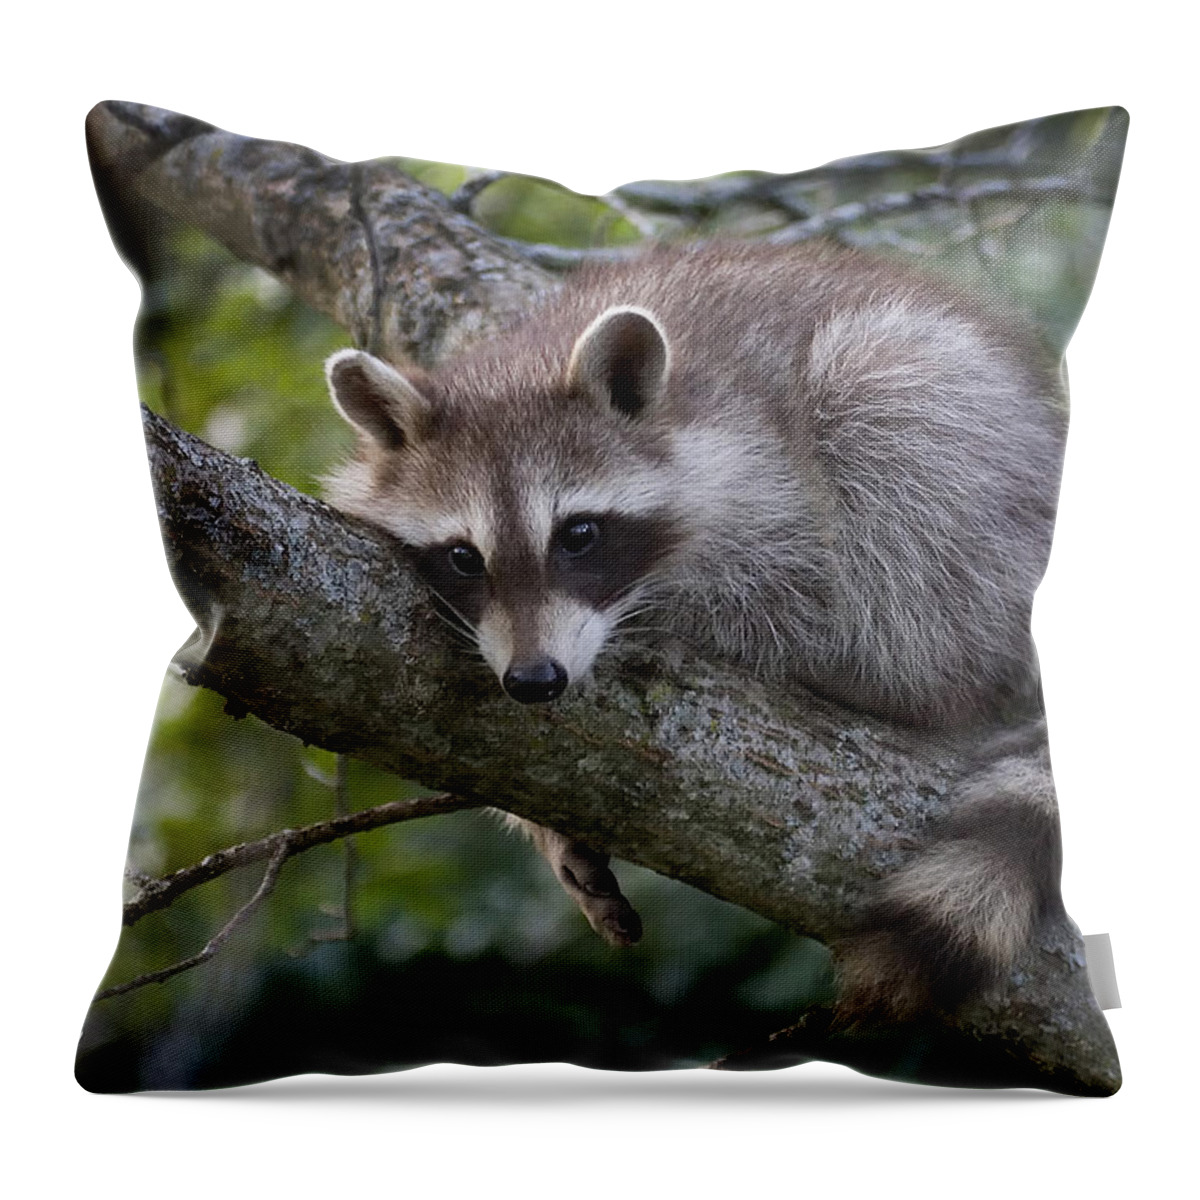 Raccoon Throw Pillow featuring the photograph Baby Bandit by Don Anderson